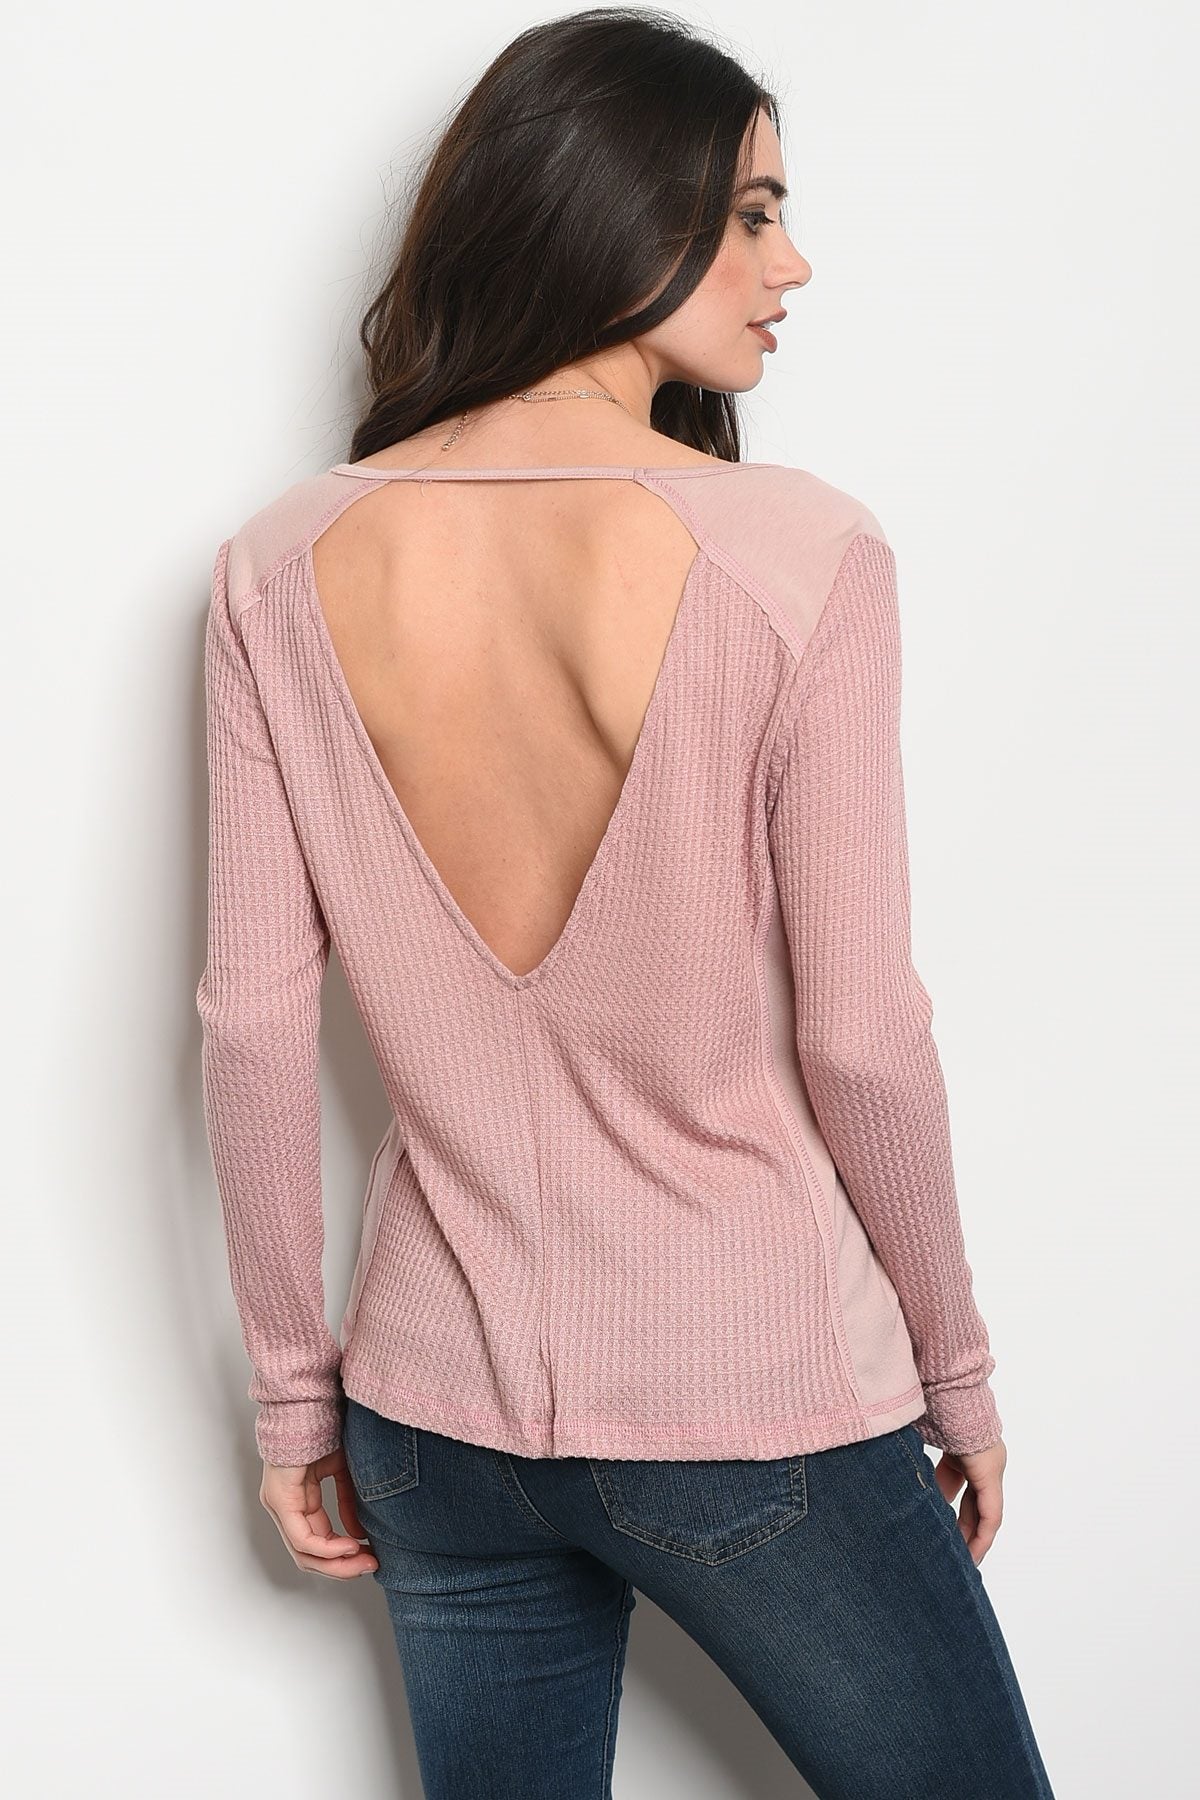 Ladies fashion long sleeve relaxed fit thermal top that features a v neckline